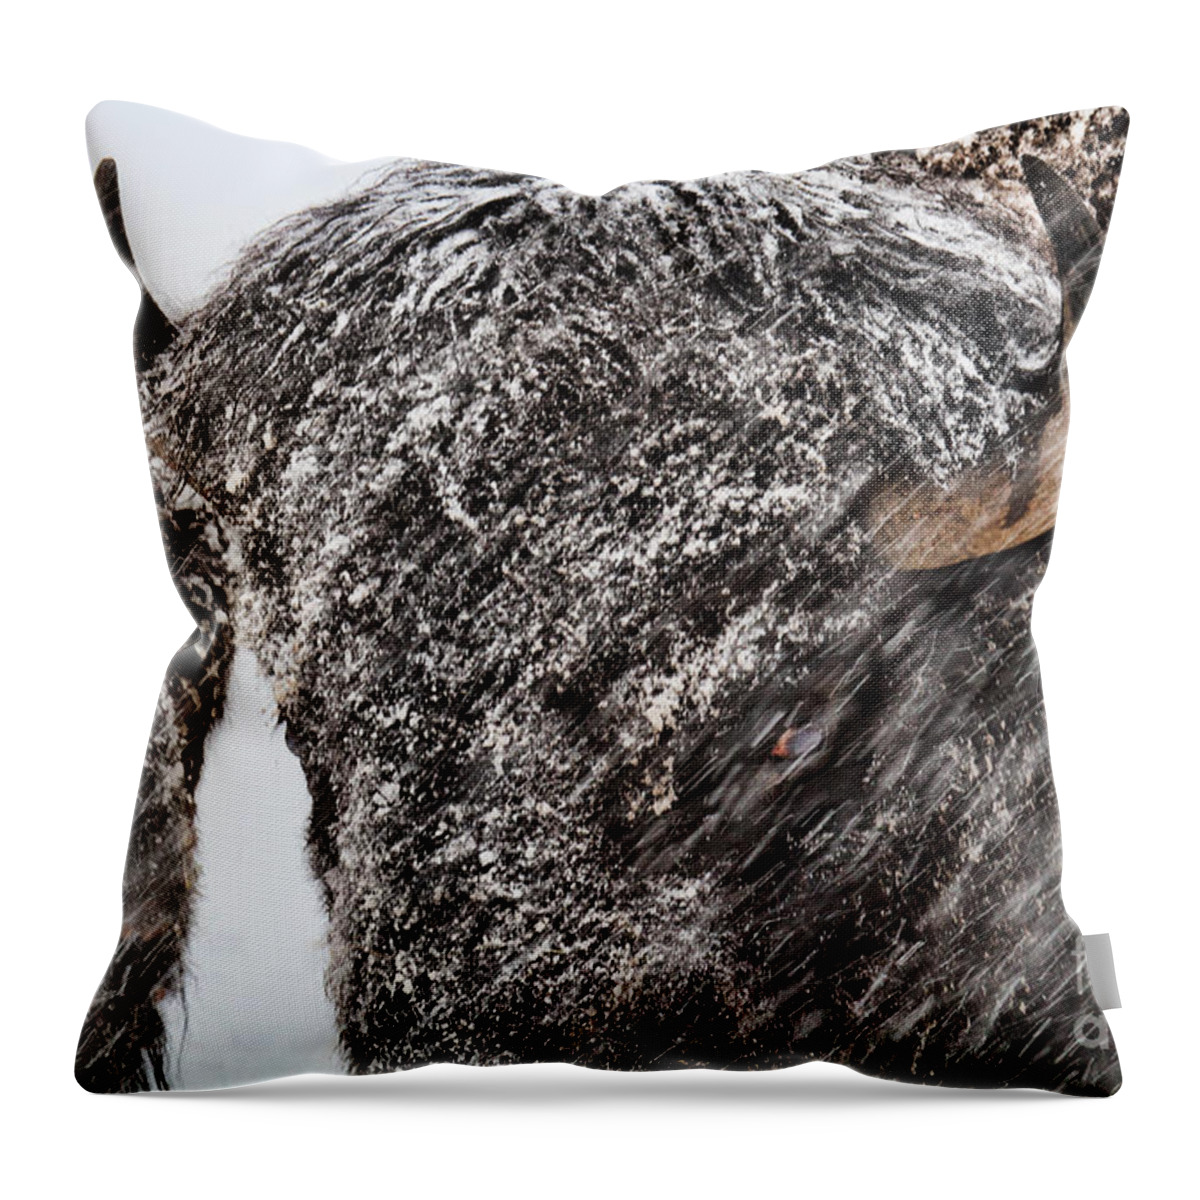 Buffalo Throw Pillow featuring the photograph Winter's Fury by Jim Garrison